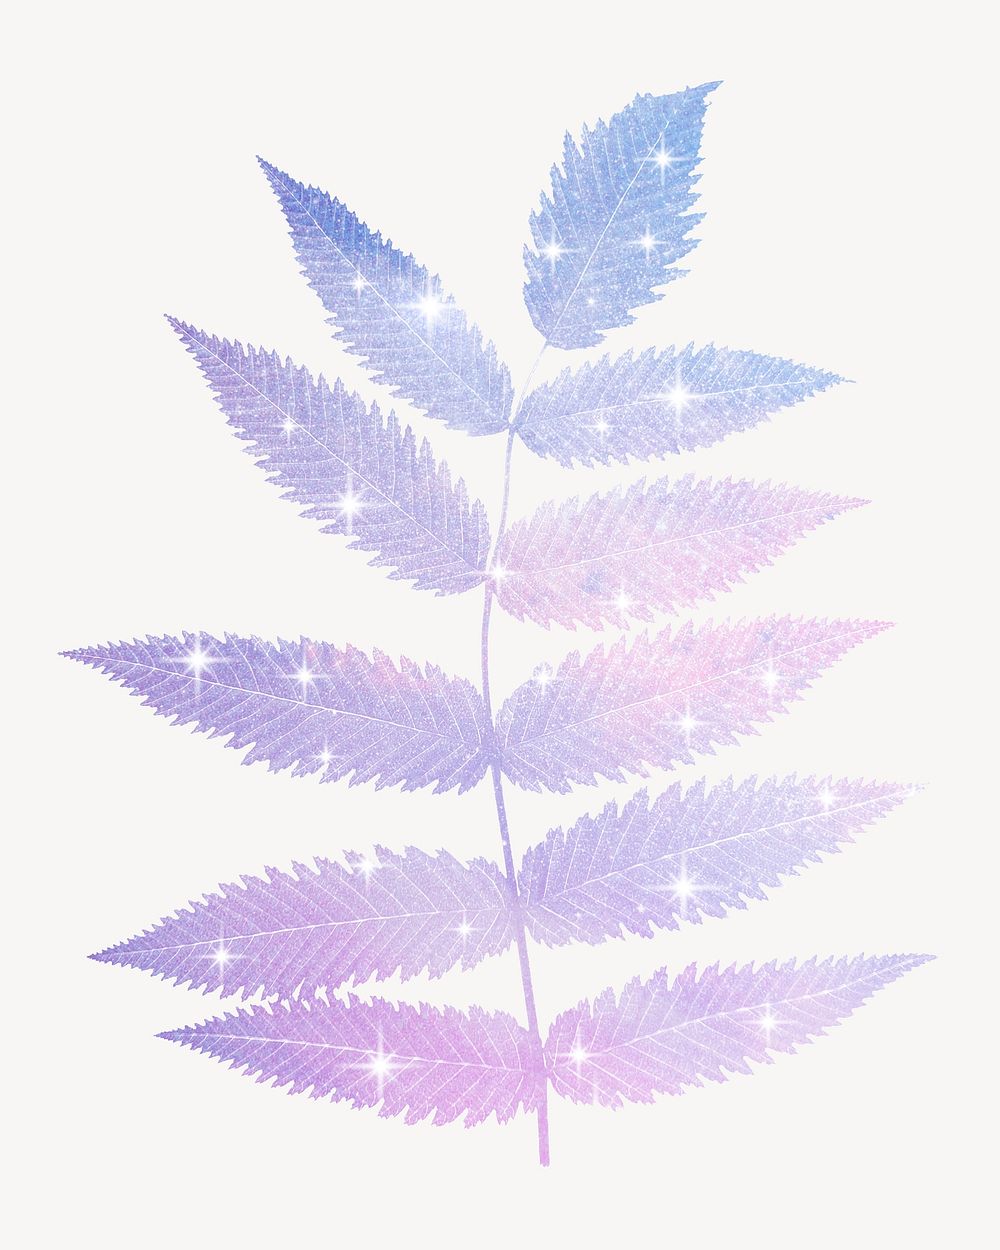 Aesthetic glittery leaf, isolated plant in holographic design